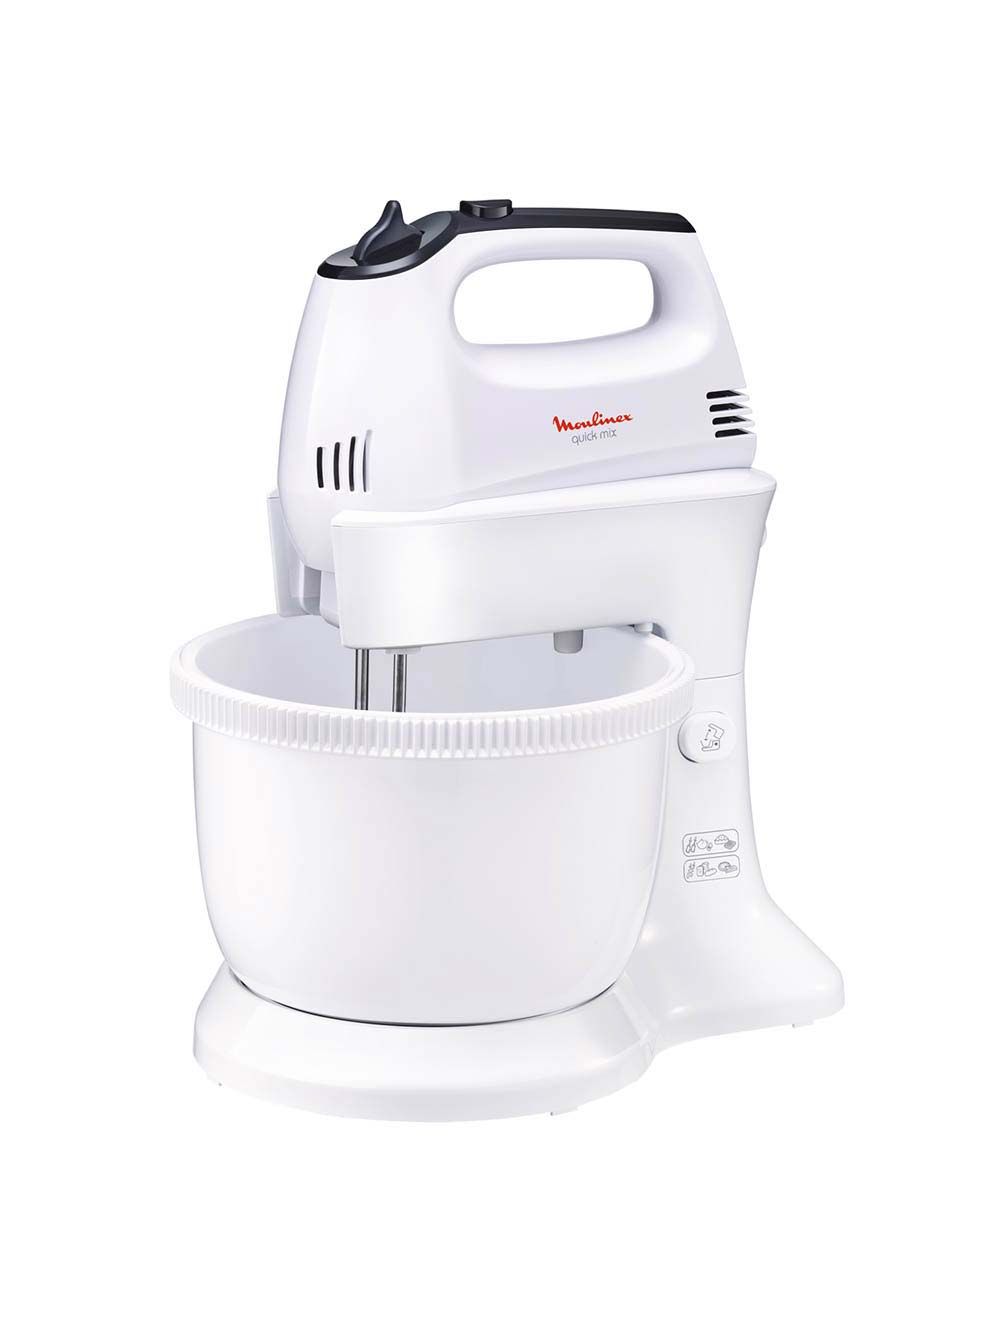 Moulinex Quick Mix Hand/Stand Mixer With Stand Bowl, 300 Watts, HM311127